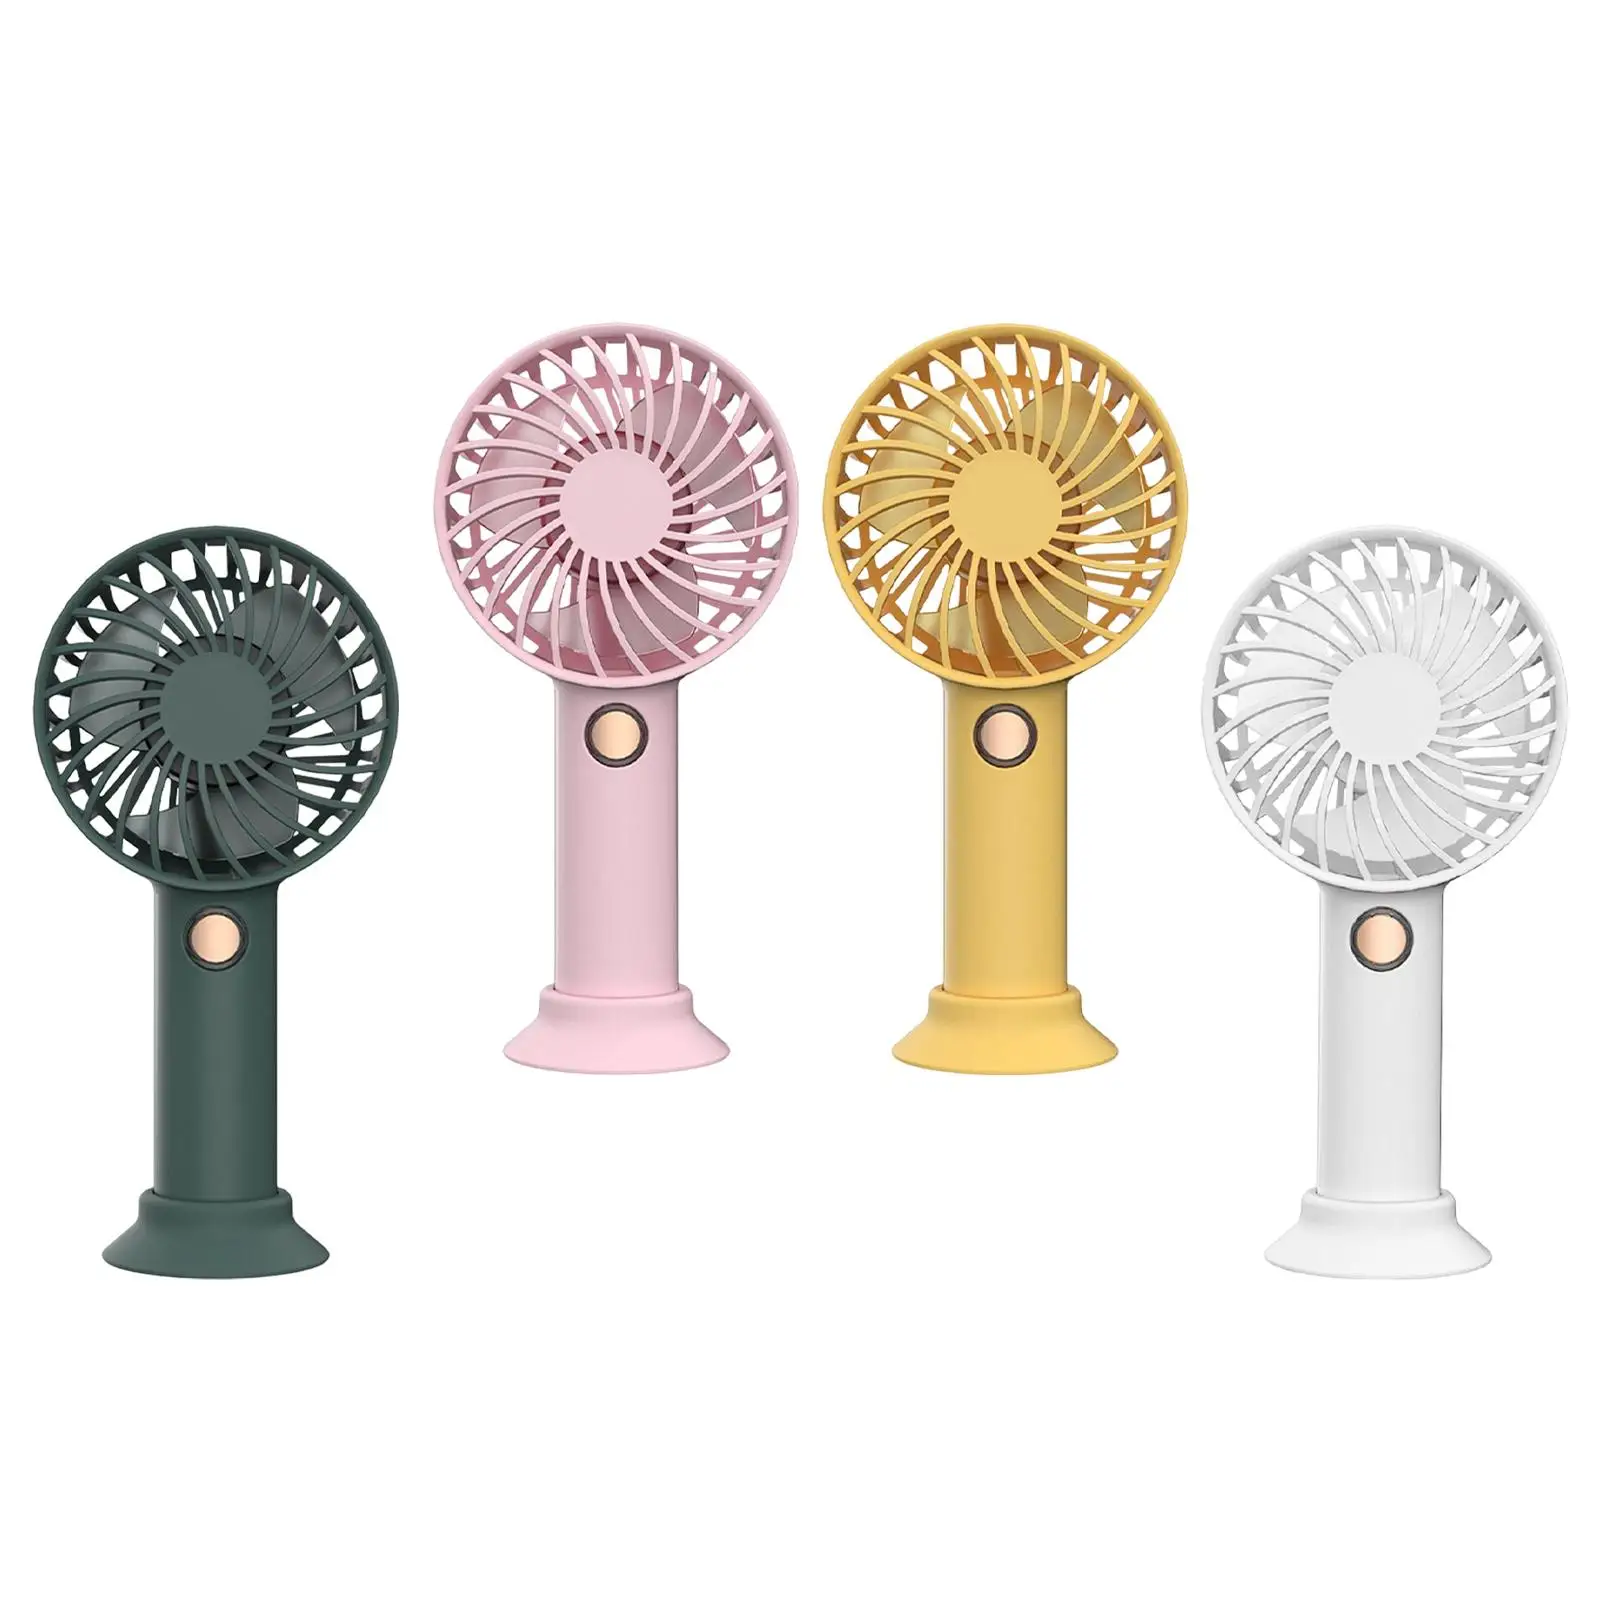 Handheld Portable Fan 3 Speeds Adjustable Personal Fan Battery Powered USB Rechargeable with Base  Outdoor Makeup Kids Gift